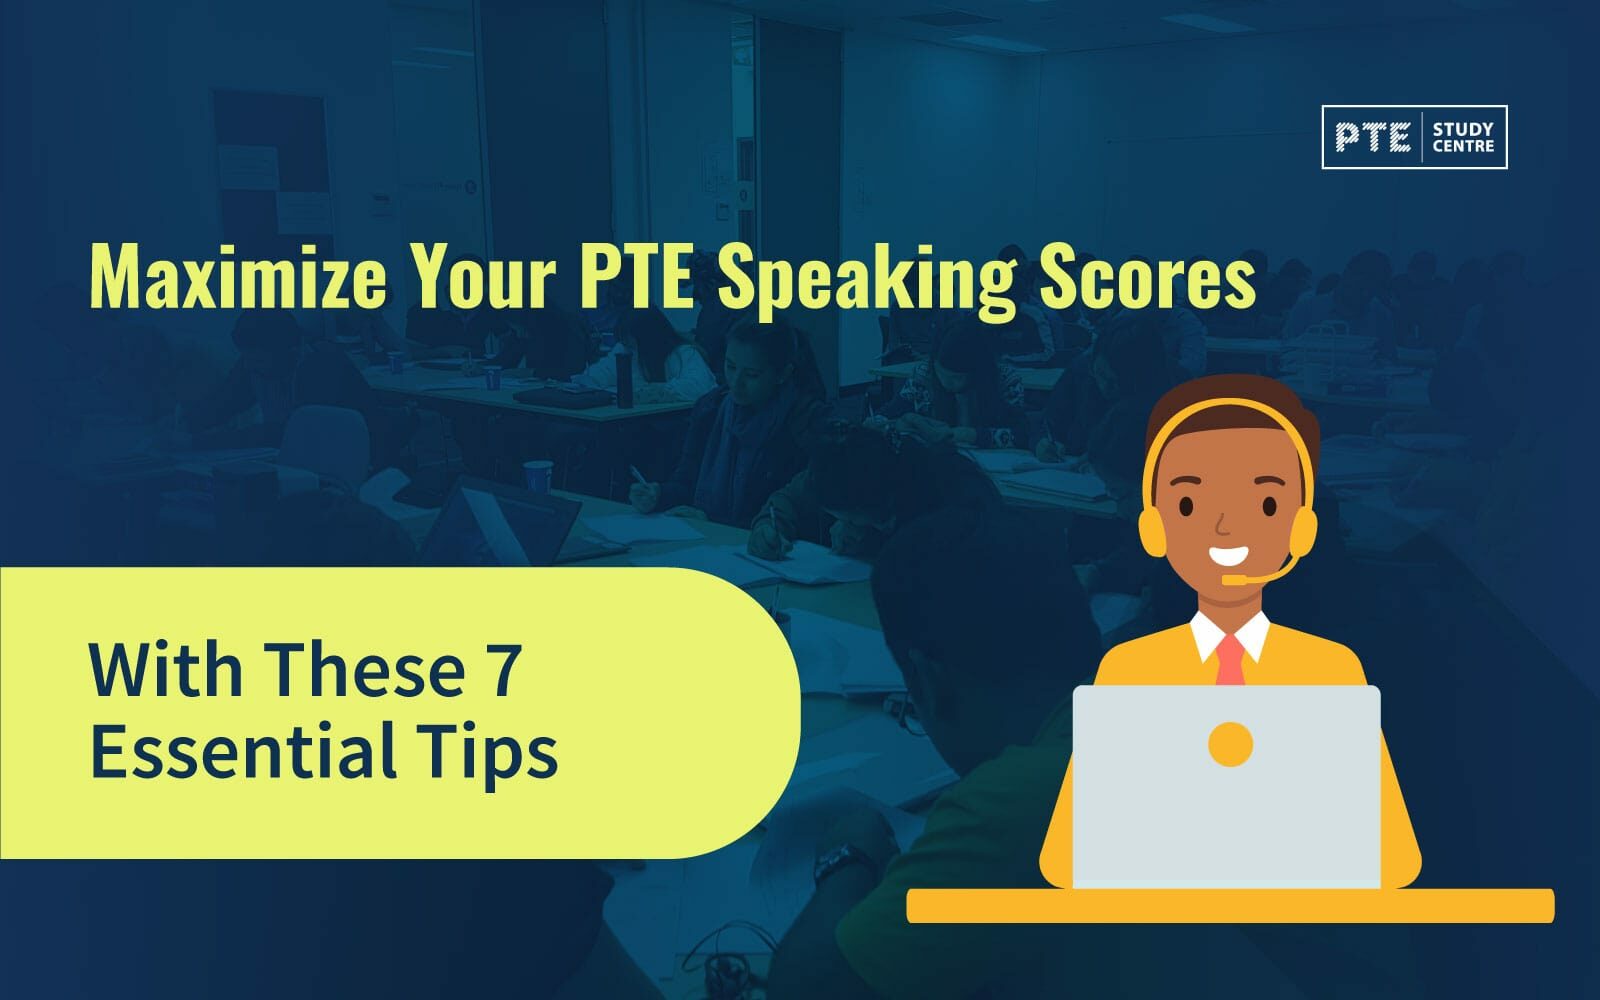 Maximize Your PTE Speaking Scores with These 7 Essential Tips image